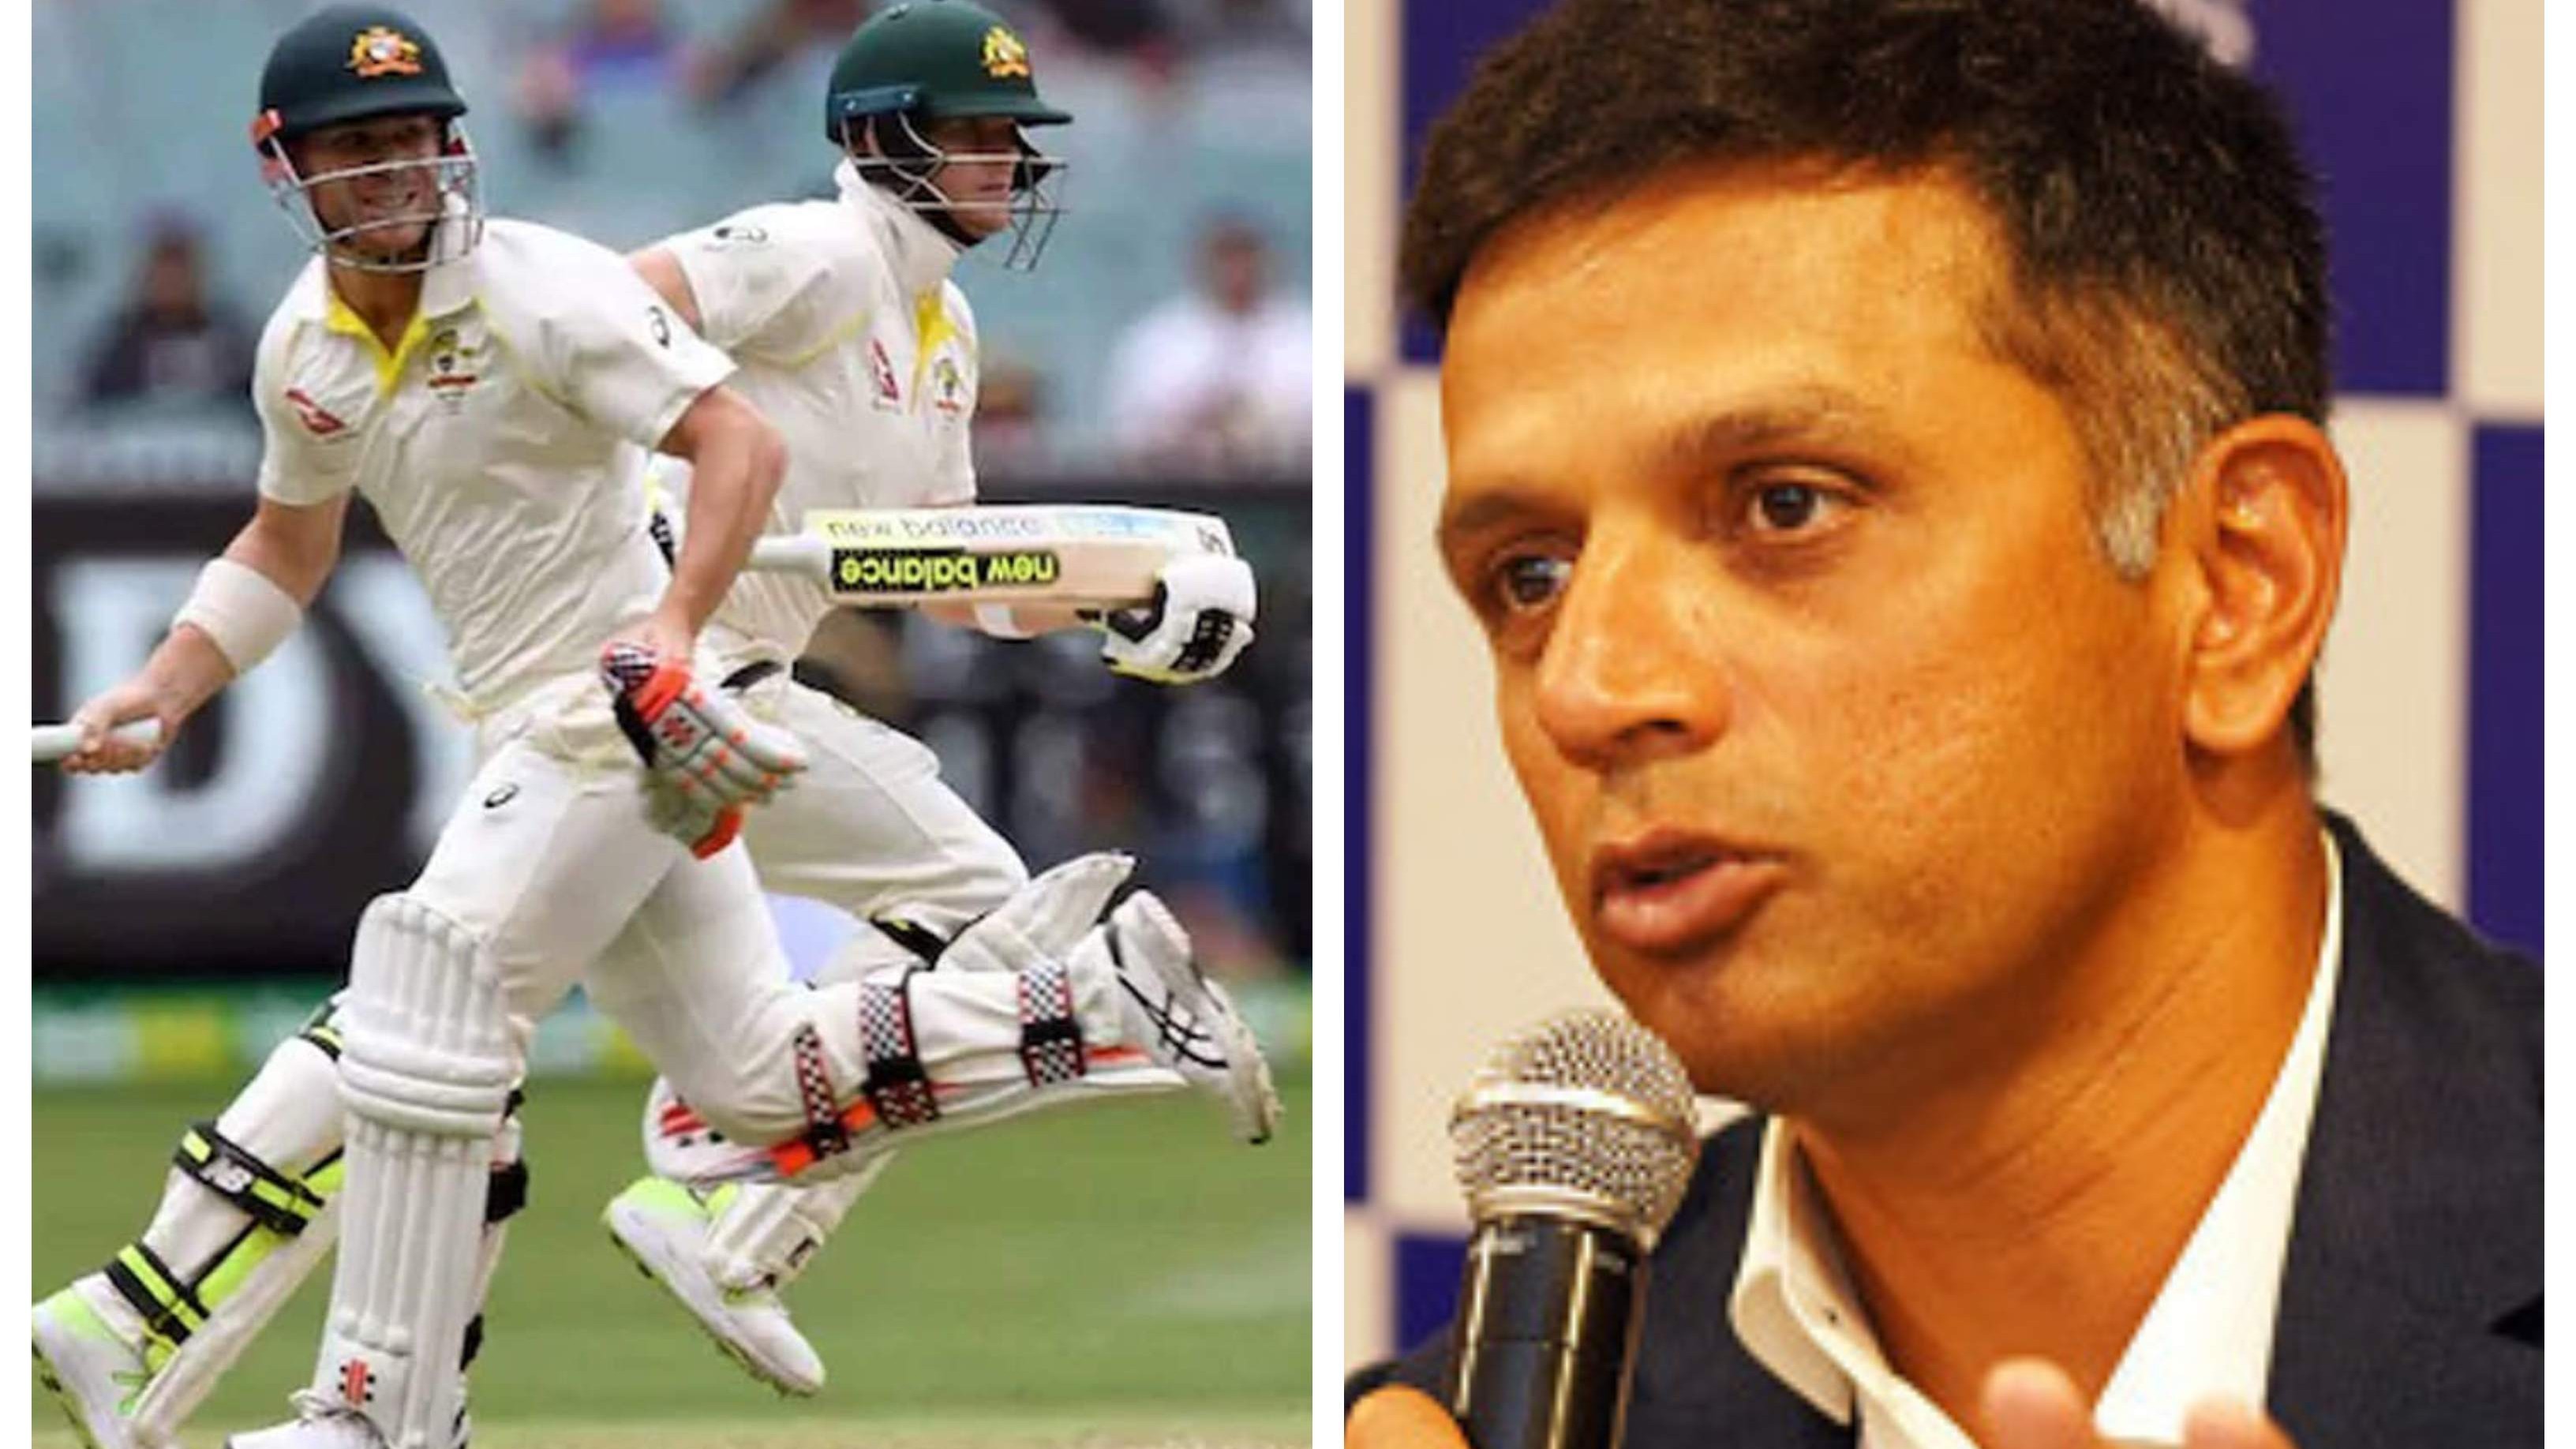 India will face ‘bigger and stiffer challenge’ in Australia with Smith, Warner around: Rahul Dravid